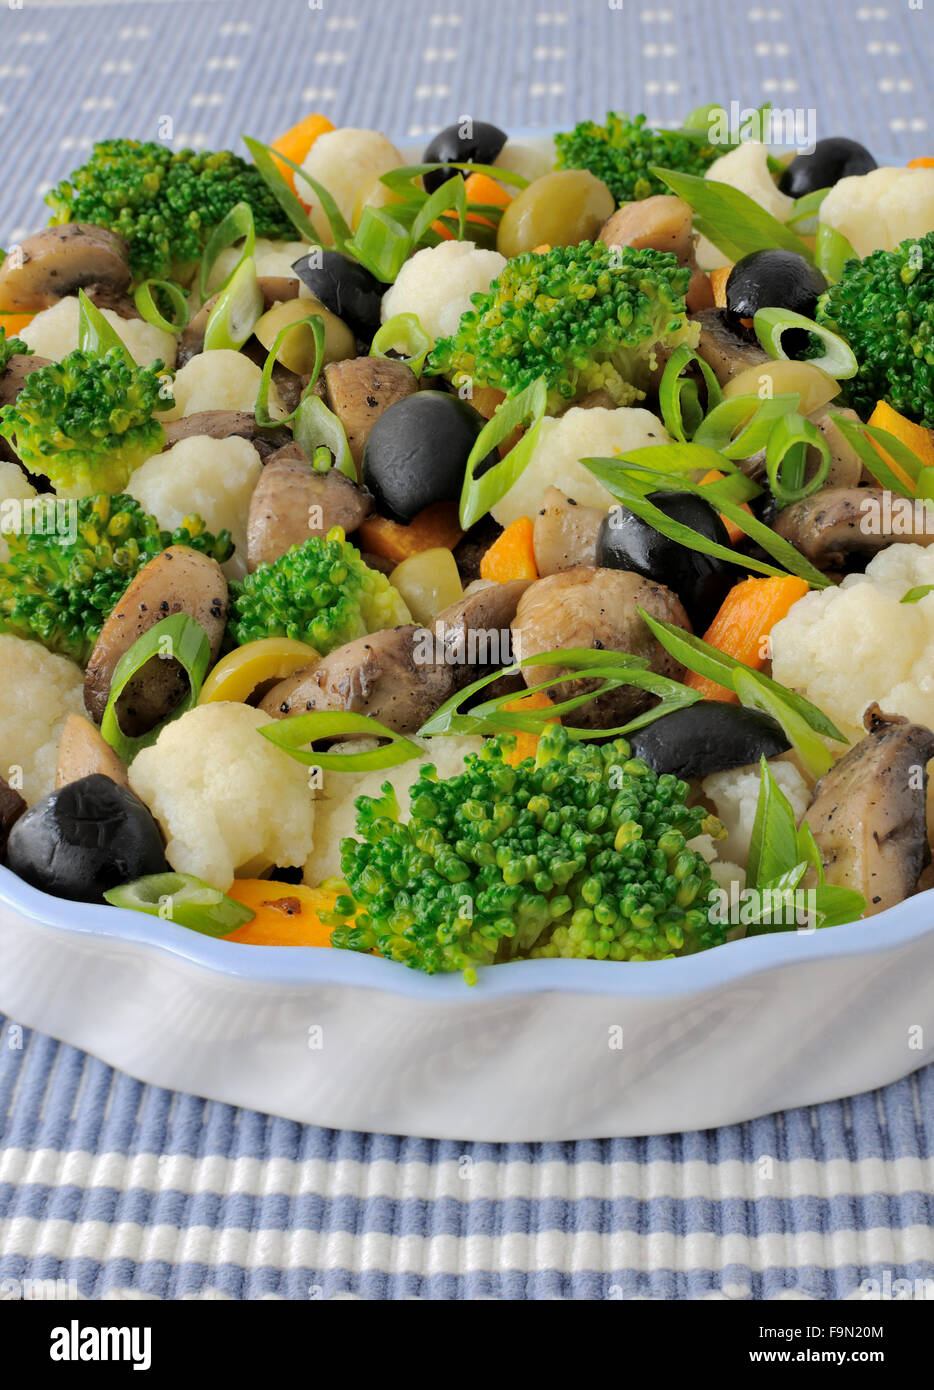 Vegetable casserole with broccoli and cauliflower, mushrooms and olives Stock Photo